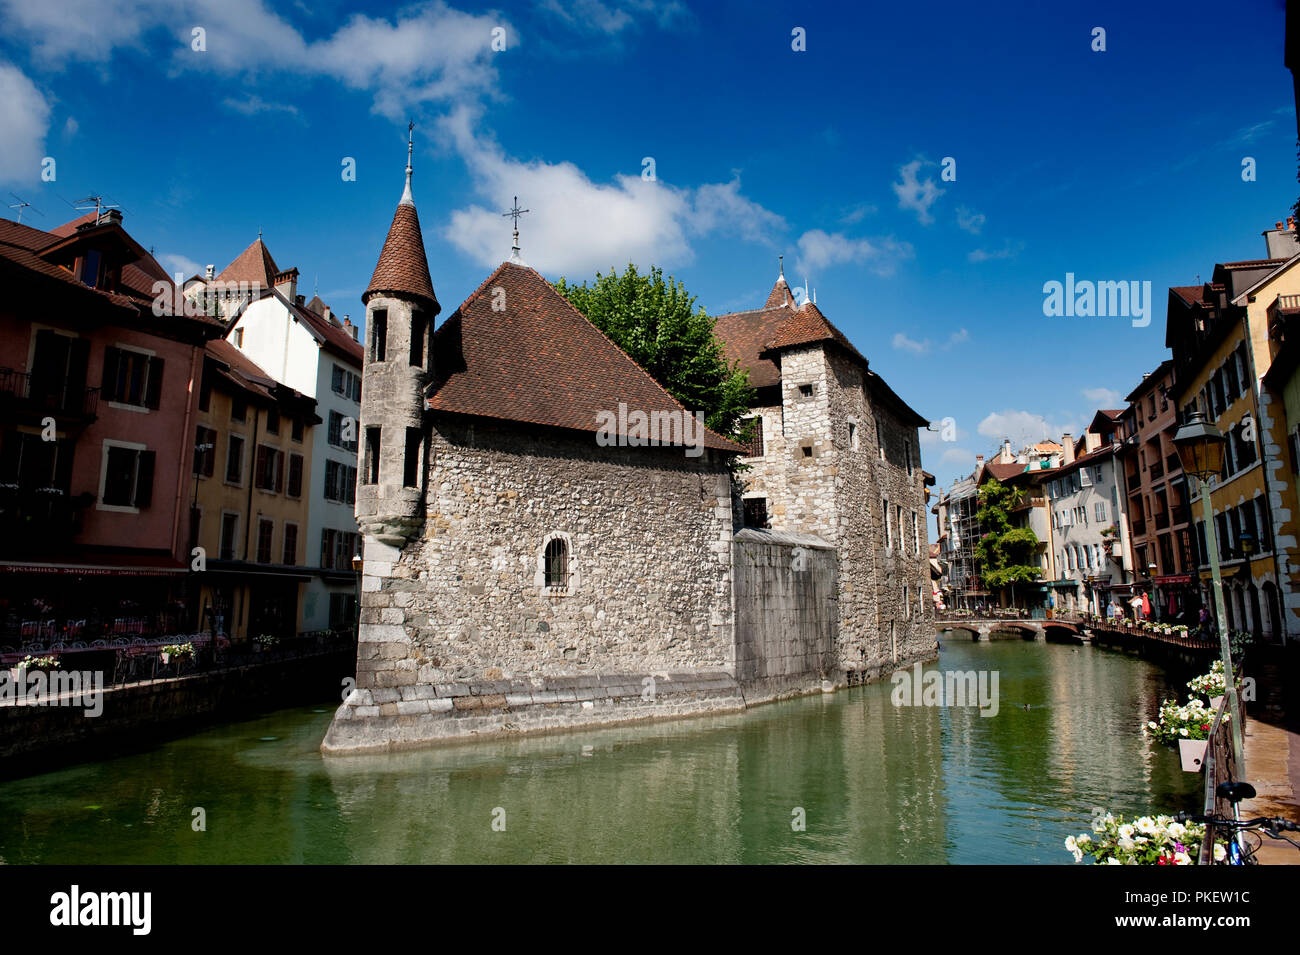 the 12th century Palais de l'Isle jail in Annecy, capital of the Haute-Savoie department (France, 22/06/2010) Stock Photo